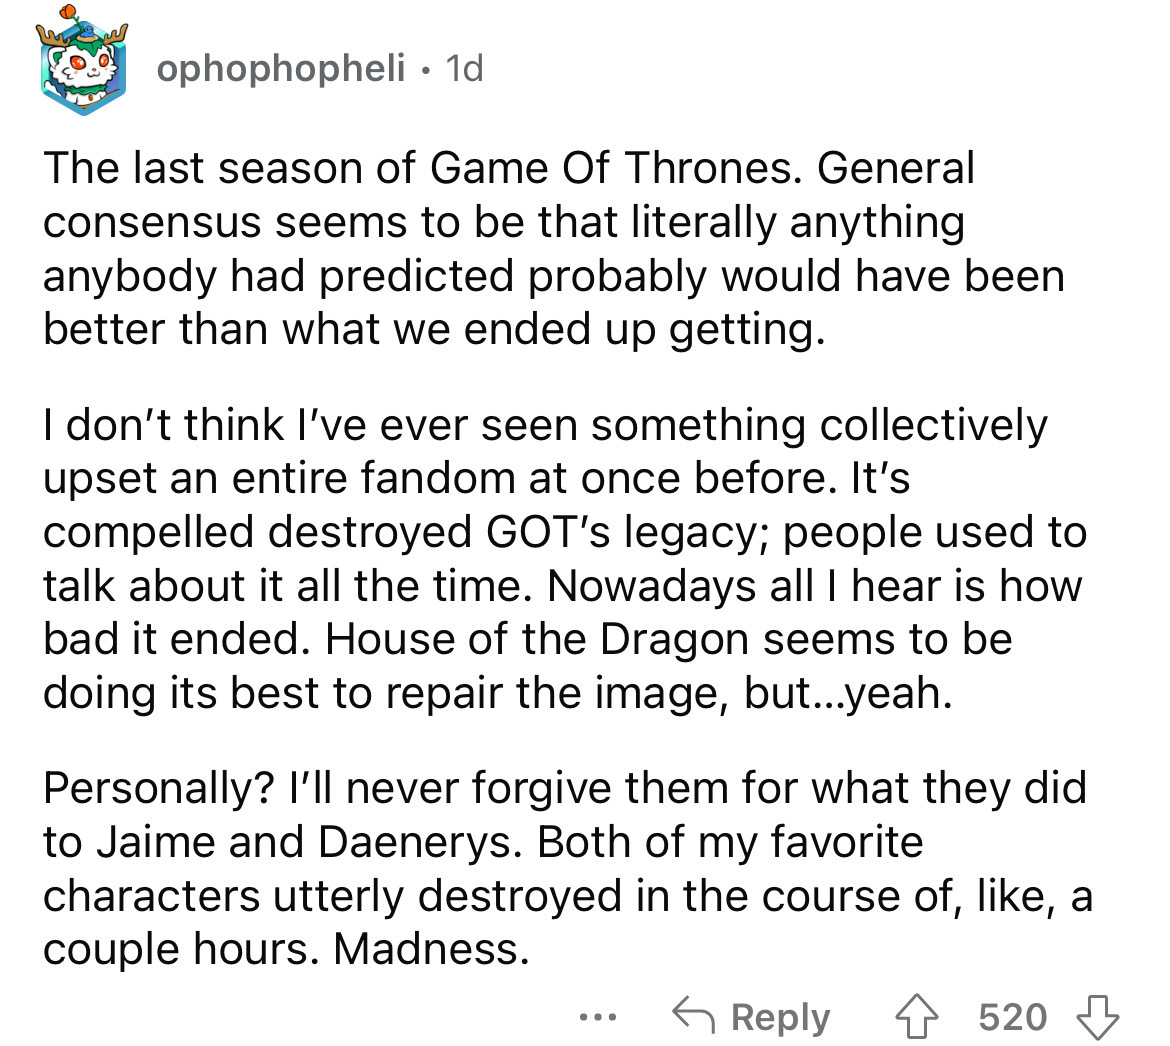 angle - ophophopheli 1d The last season of Game Of Thrones. General consensus seems to be that literally anything anybody had predicted probably would have been better than what we ended up getting. I don't think I've ever seen something collectively upse